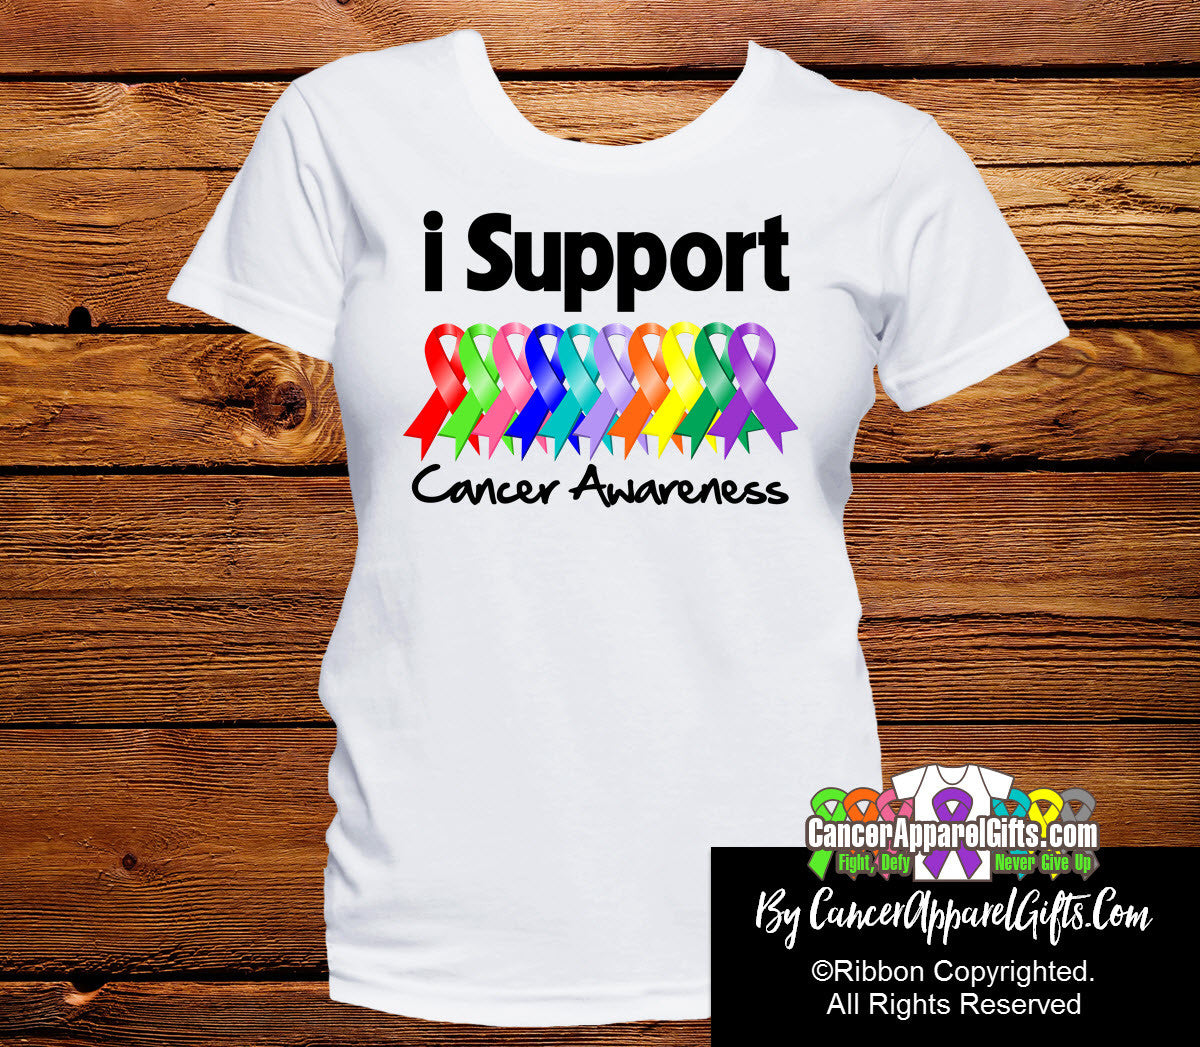 I Support Cancer Awareness Ladies Shirts